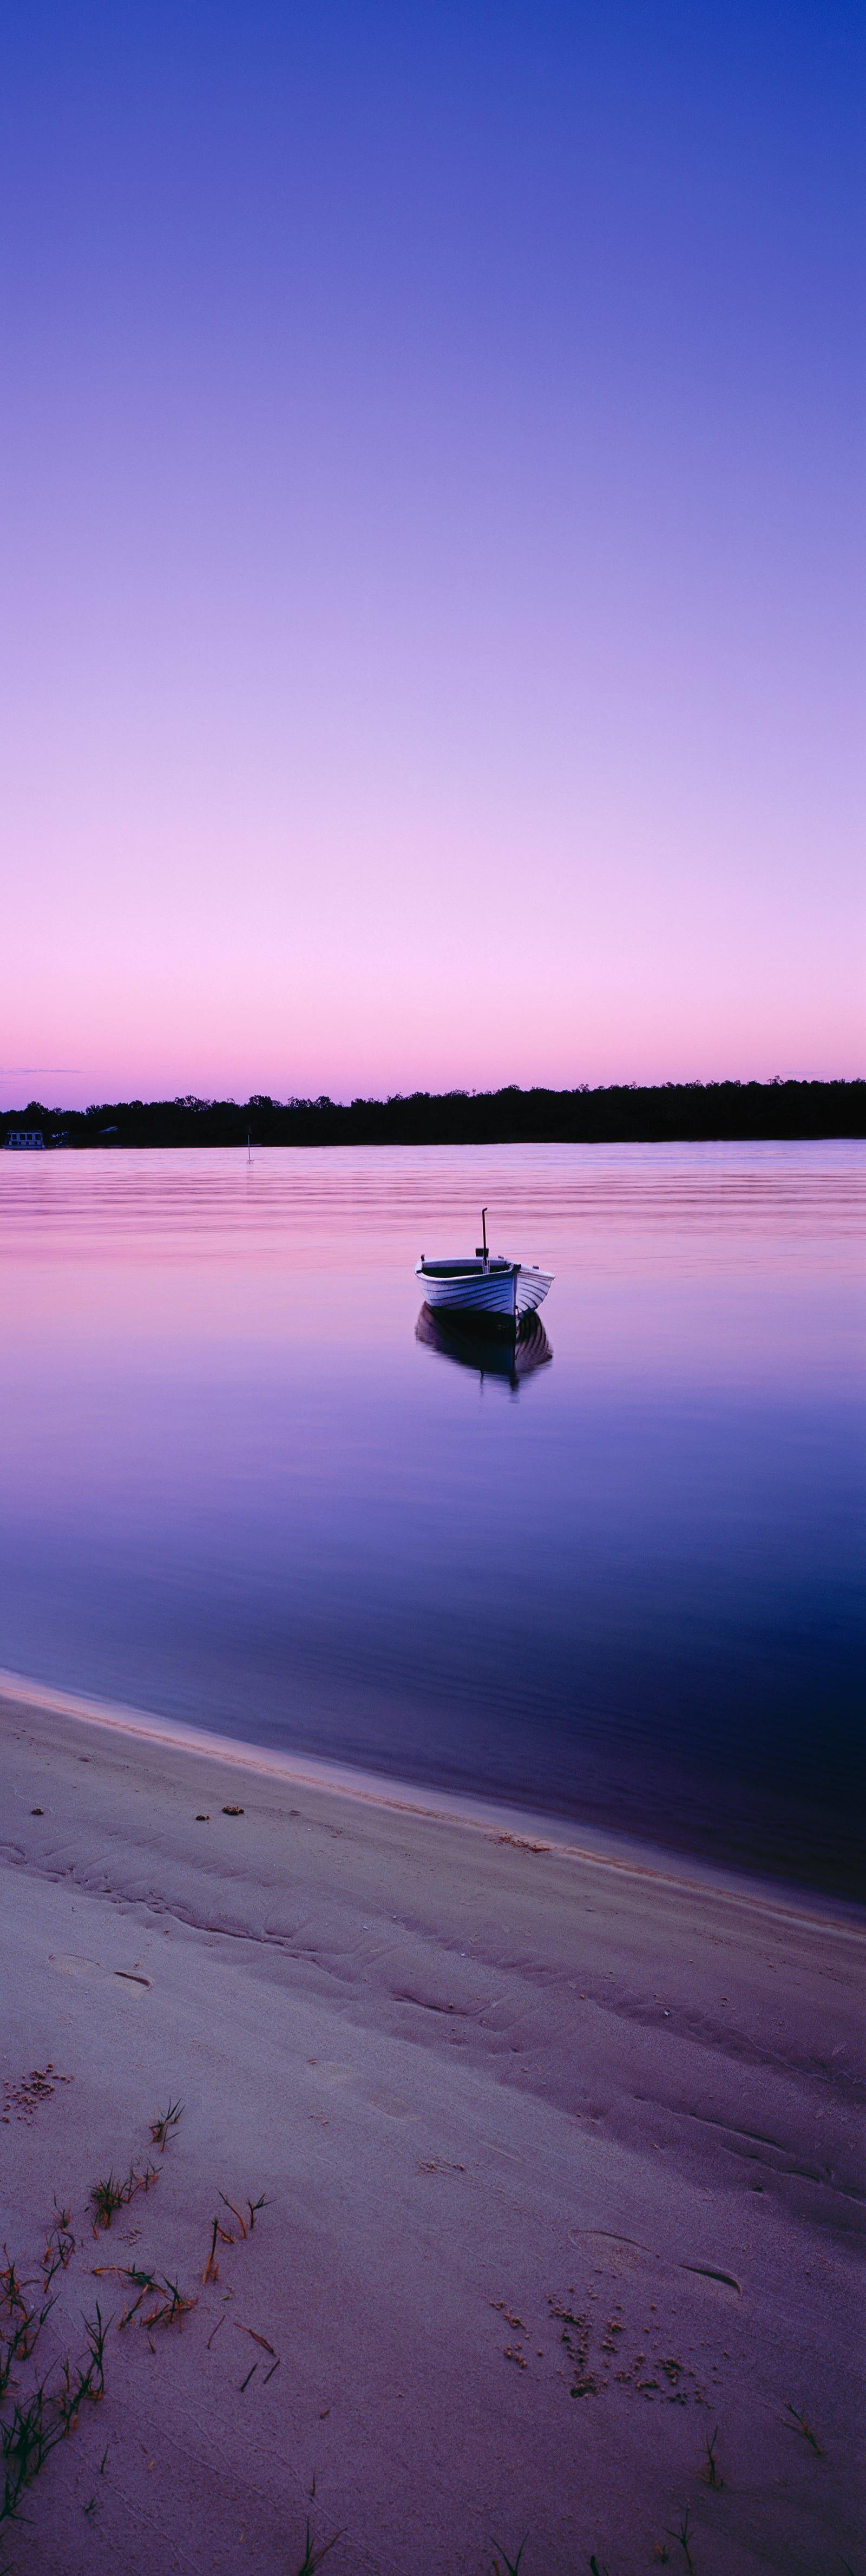 Dinghy floating off the banks of the Noosa River at sunrise with the purple sky reflecting off the water